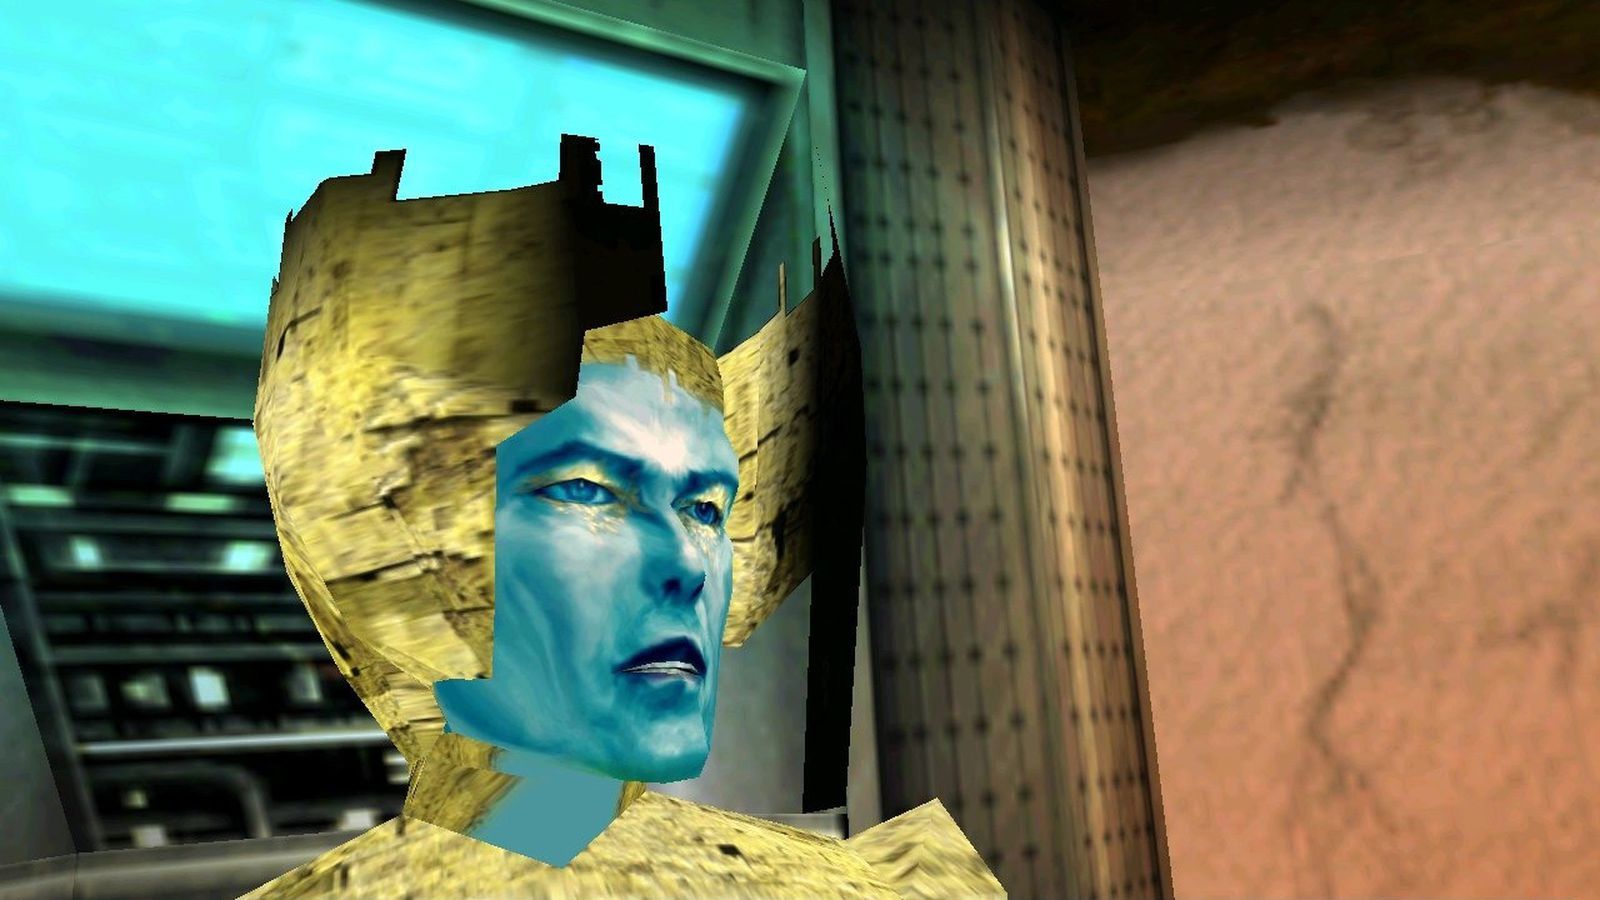 20 Strange Games From The 90s You Won’t Believe Actually Got Made